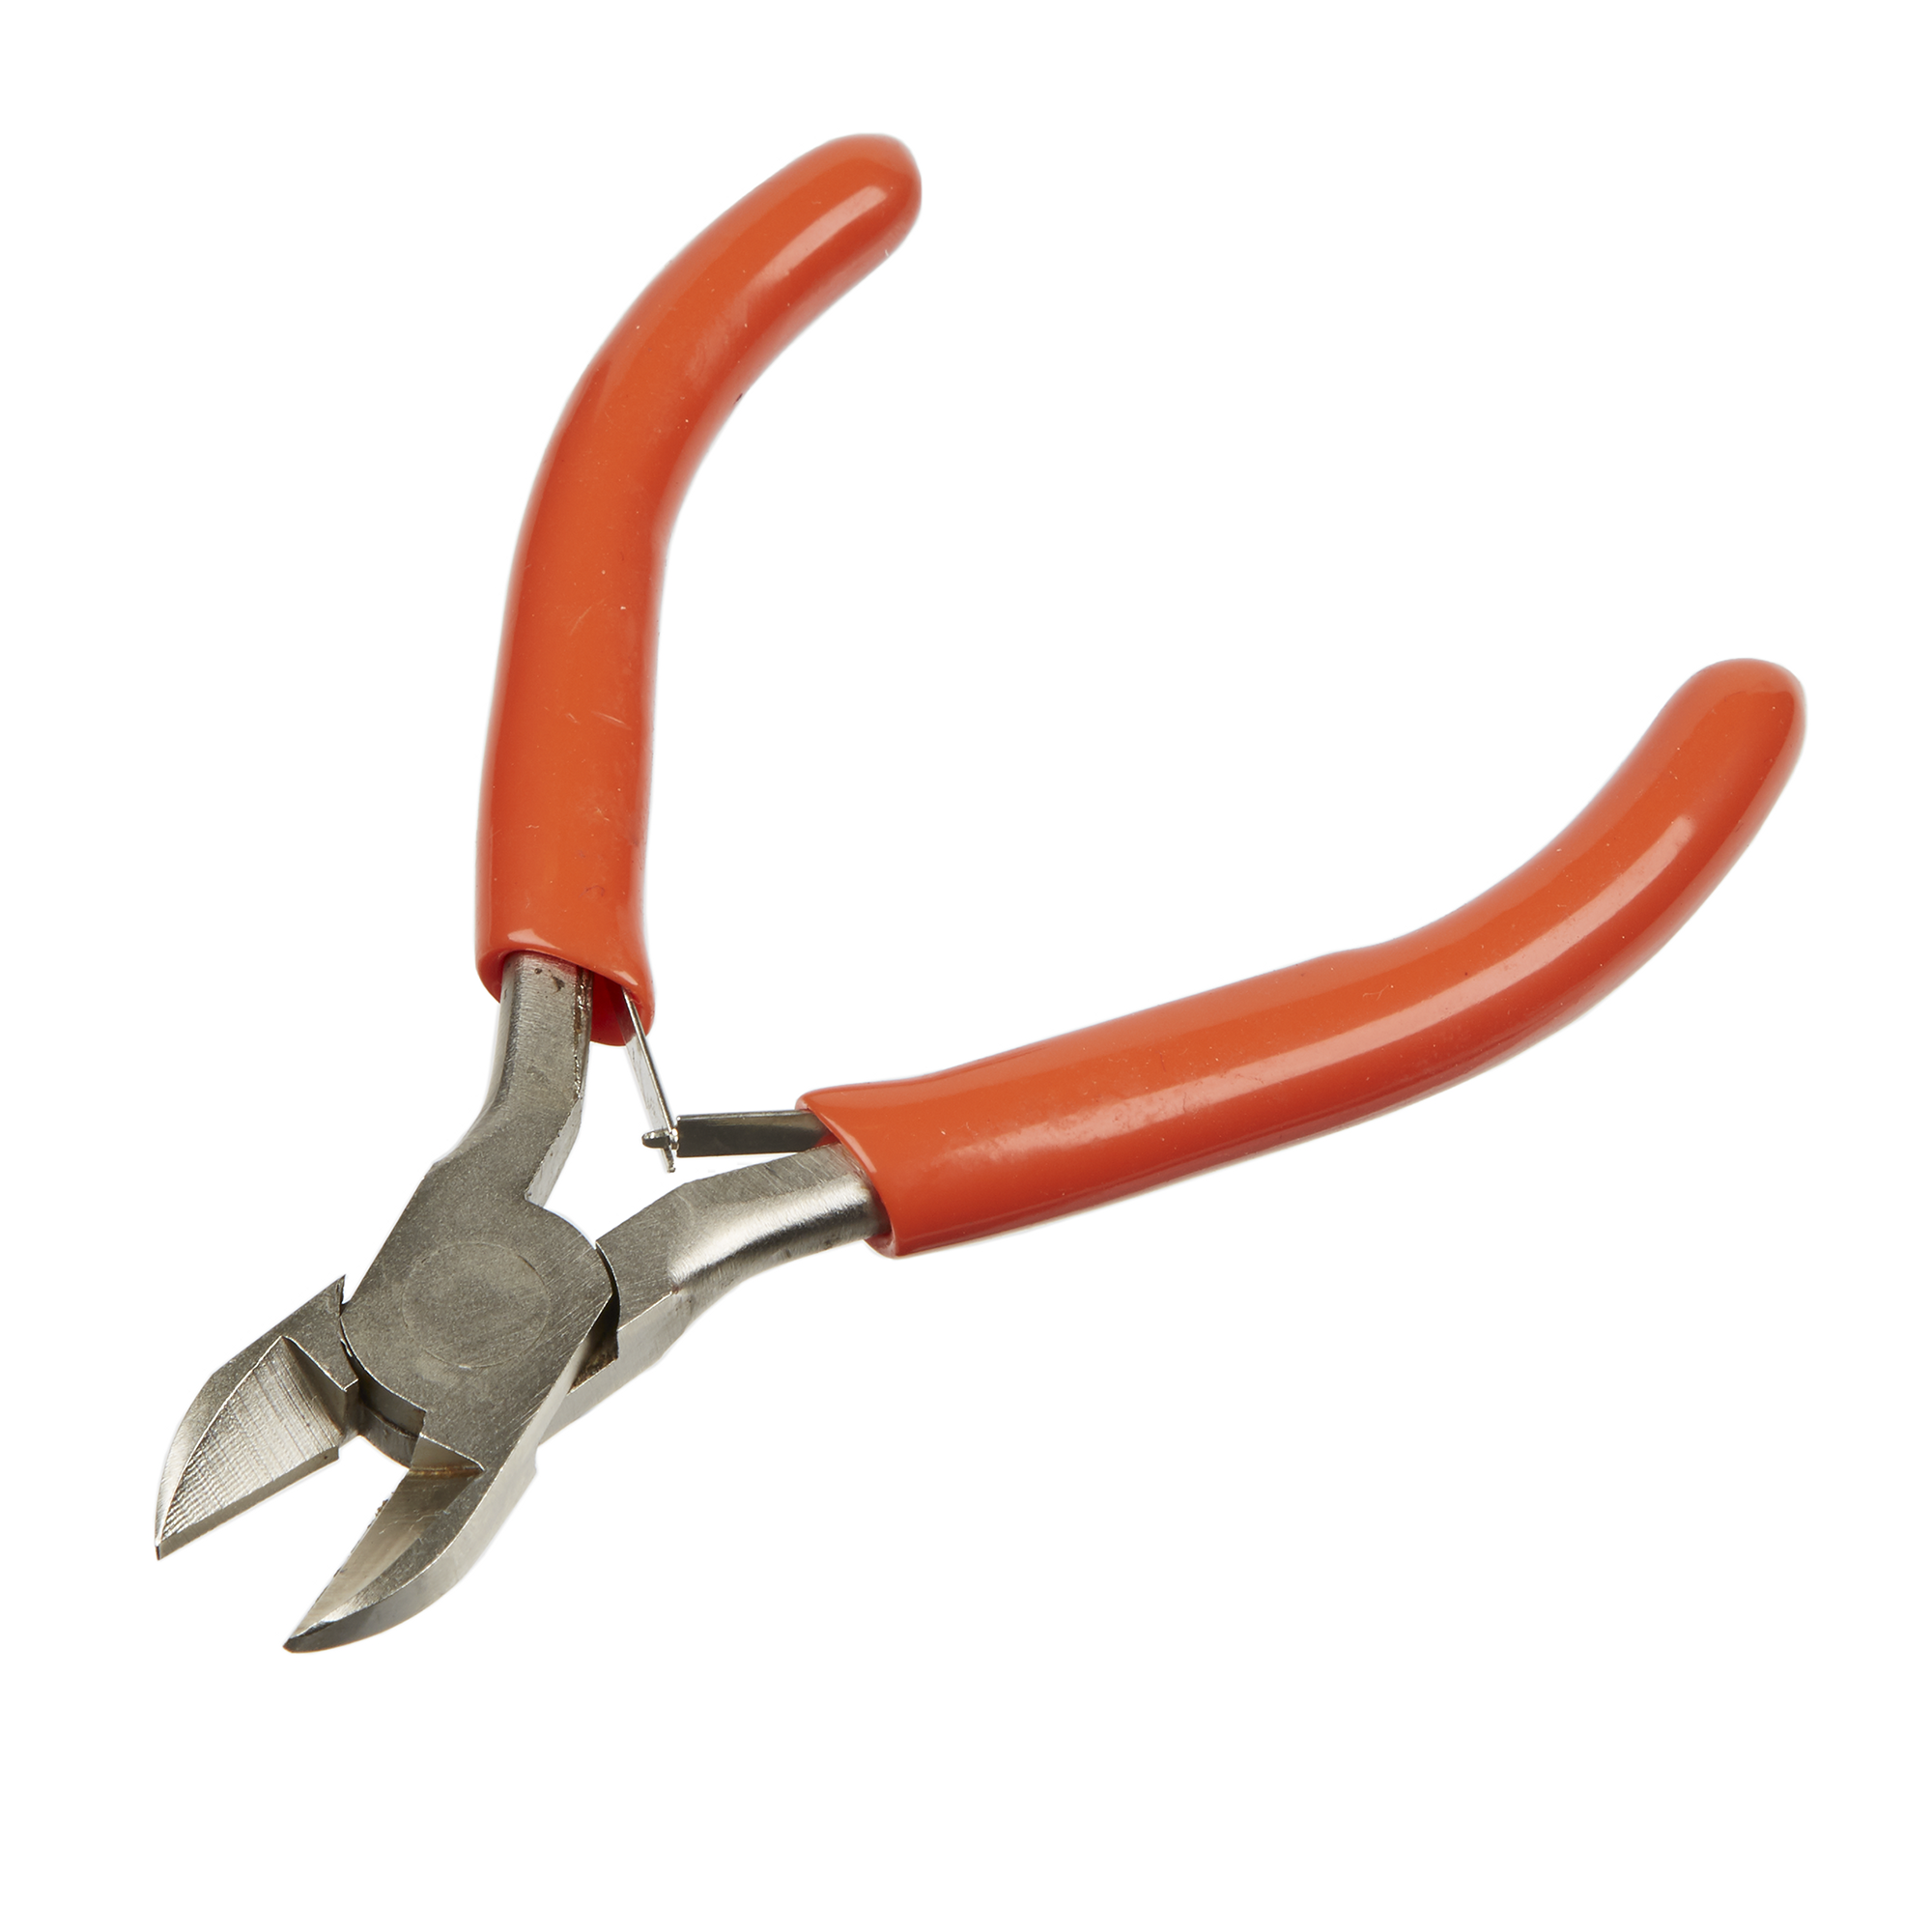 what is the use of pliers